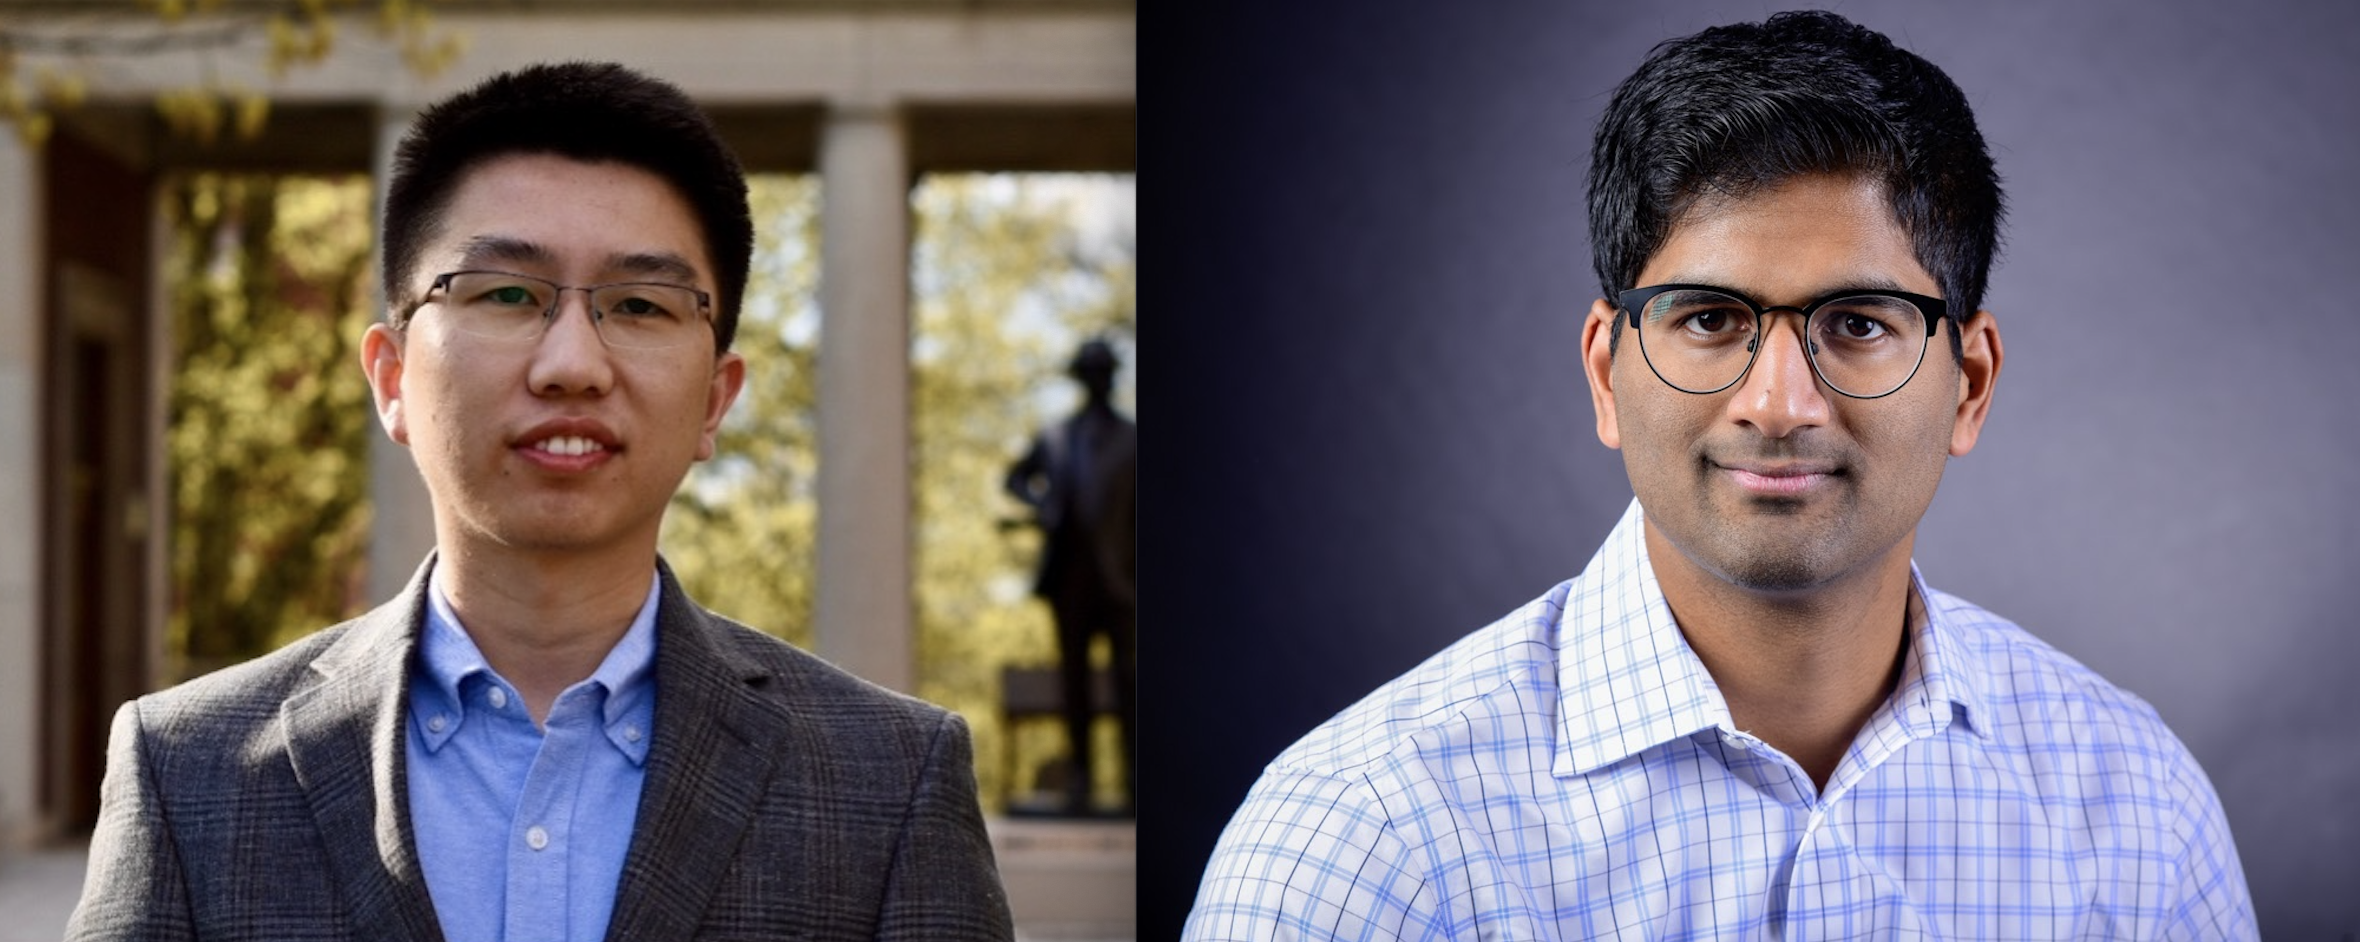 Meet our Research Affiliates: Fred Gui and Arjun Vishwanath